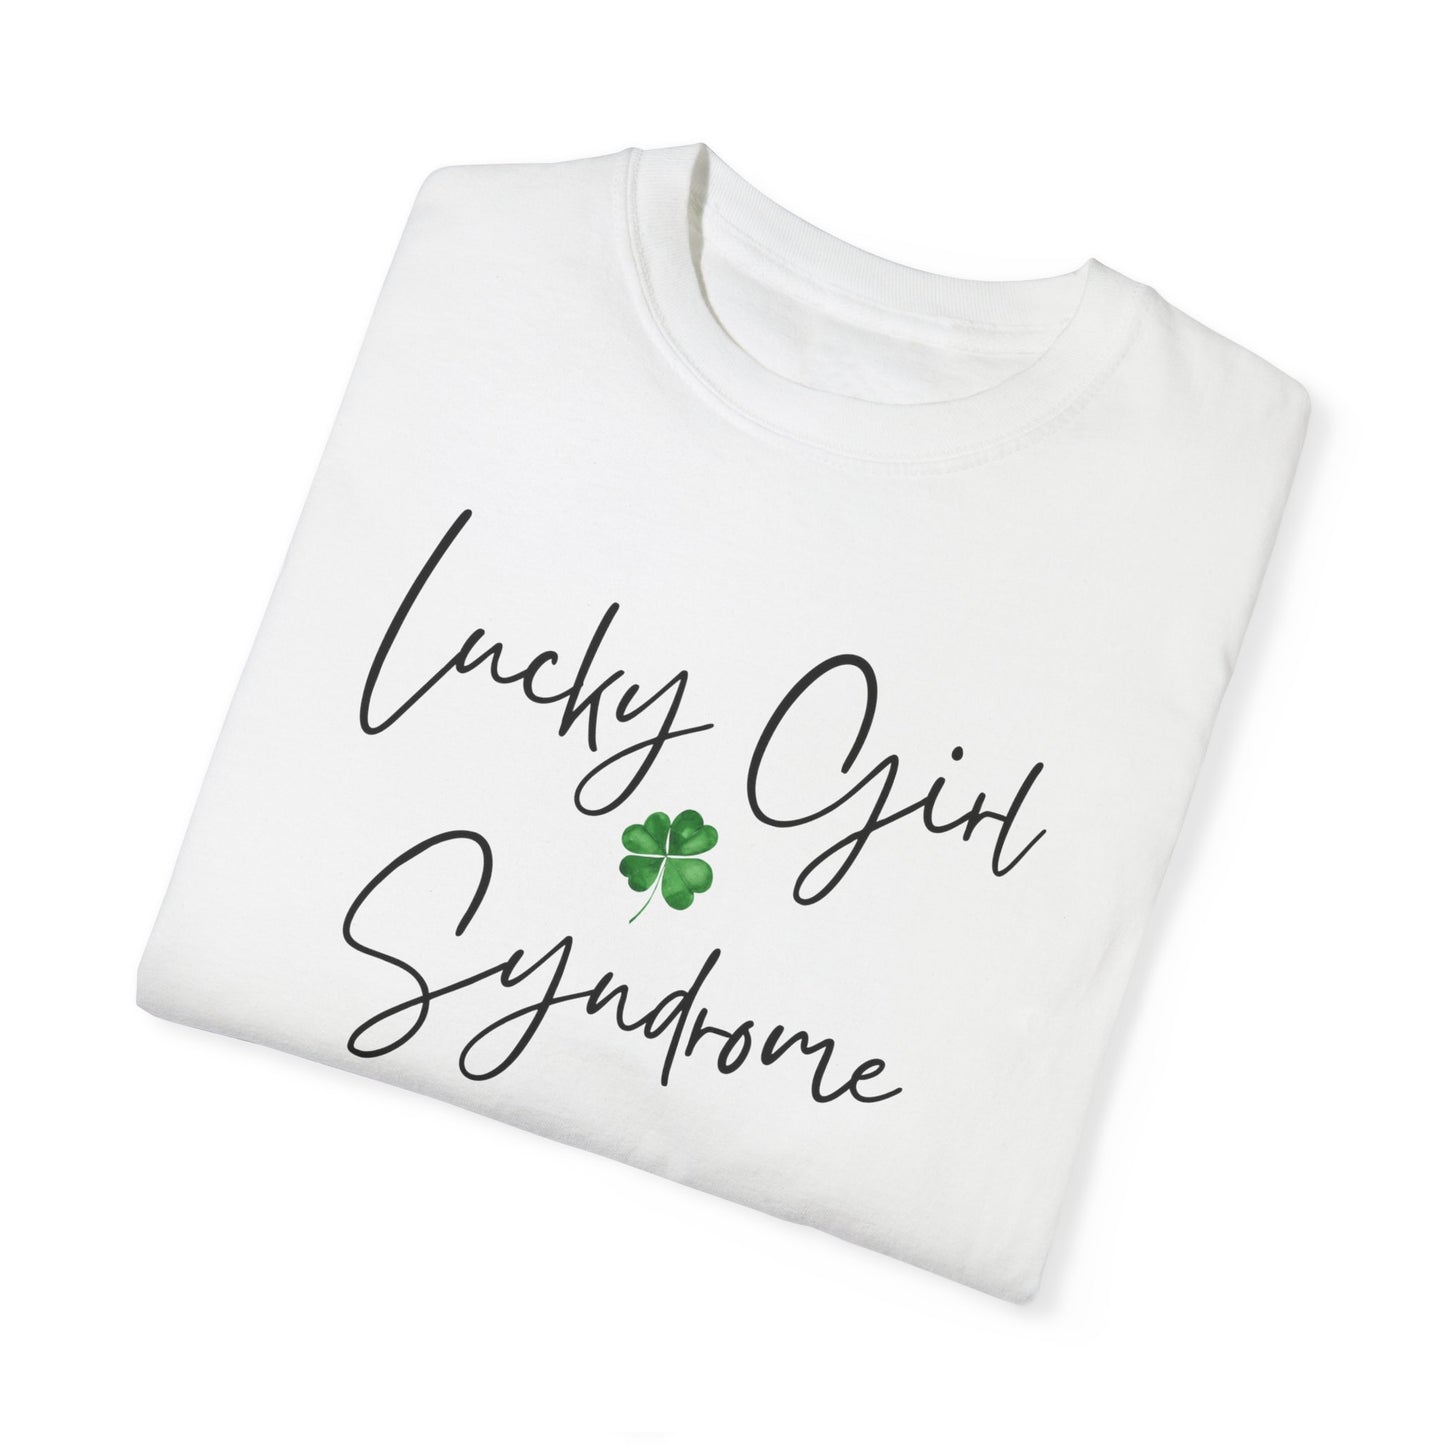 "It Girl Collection" Lucky Girl Syndrome Series Unisex Garment-Dyed T-shirt